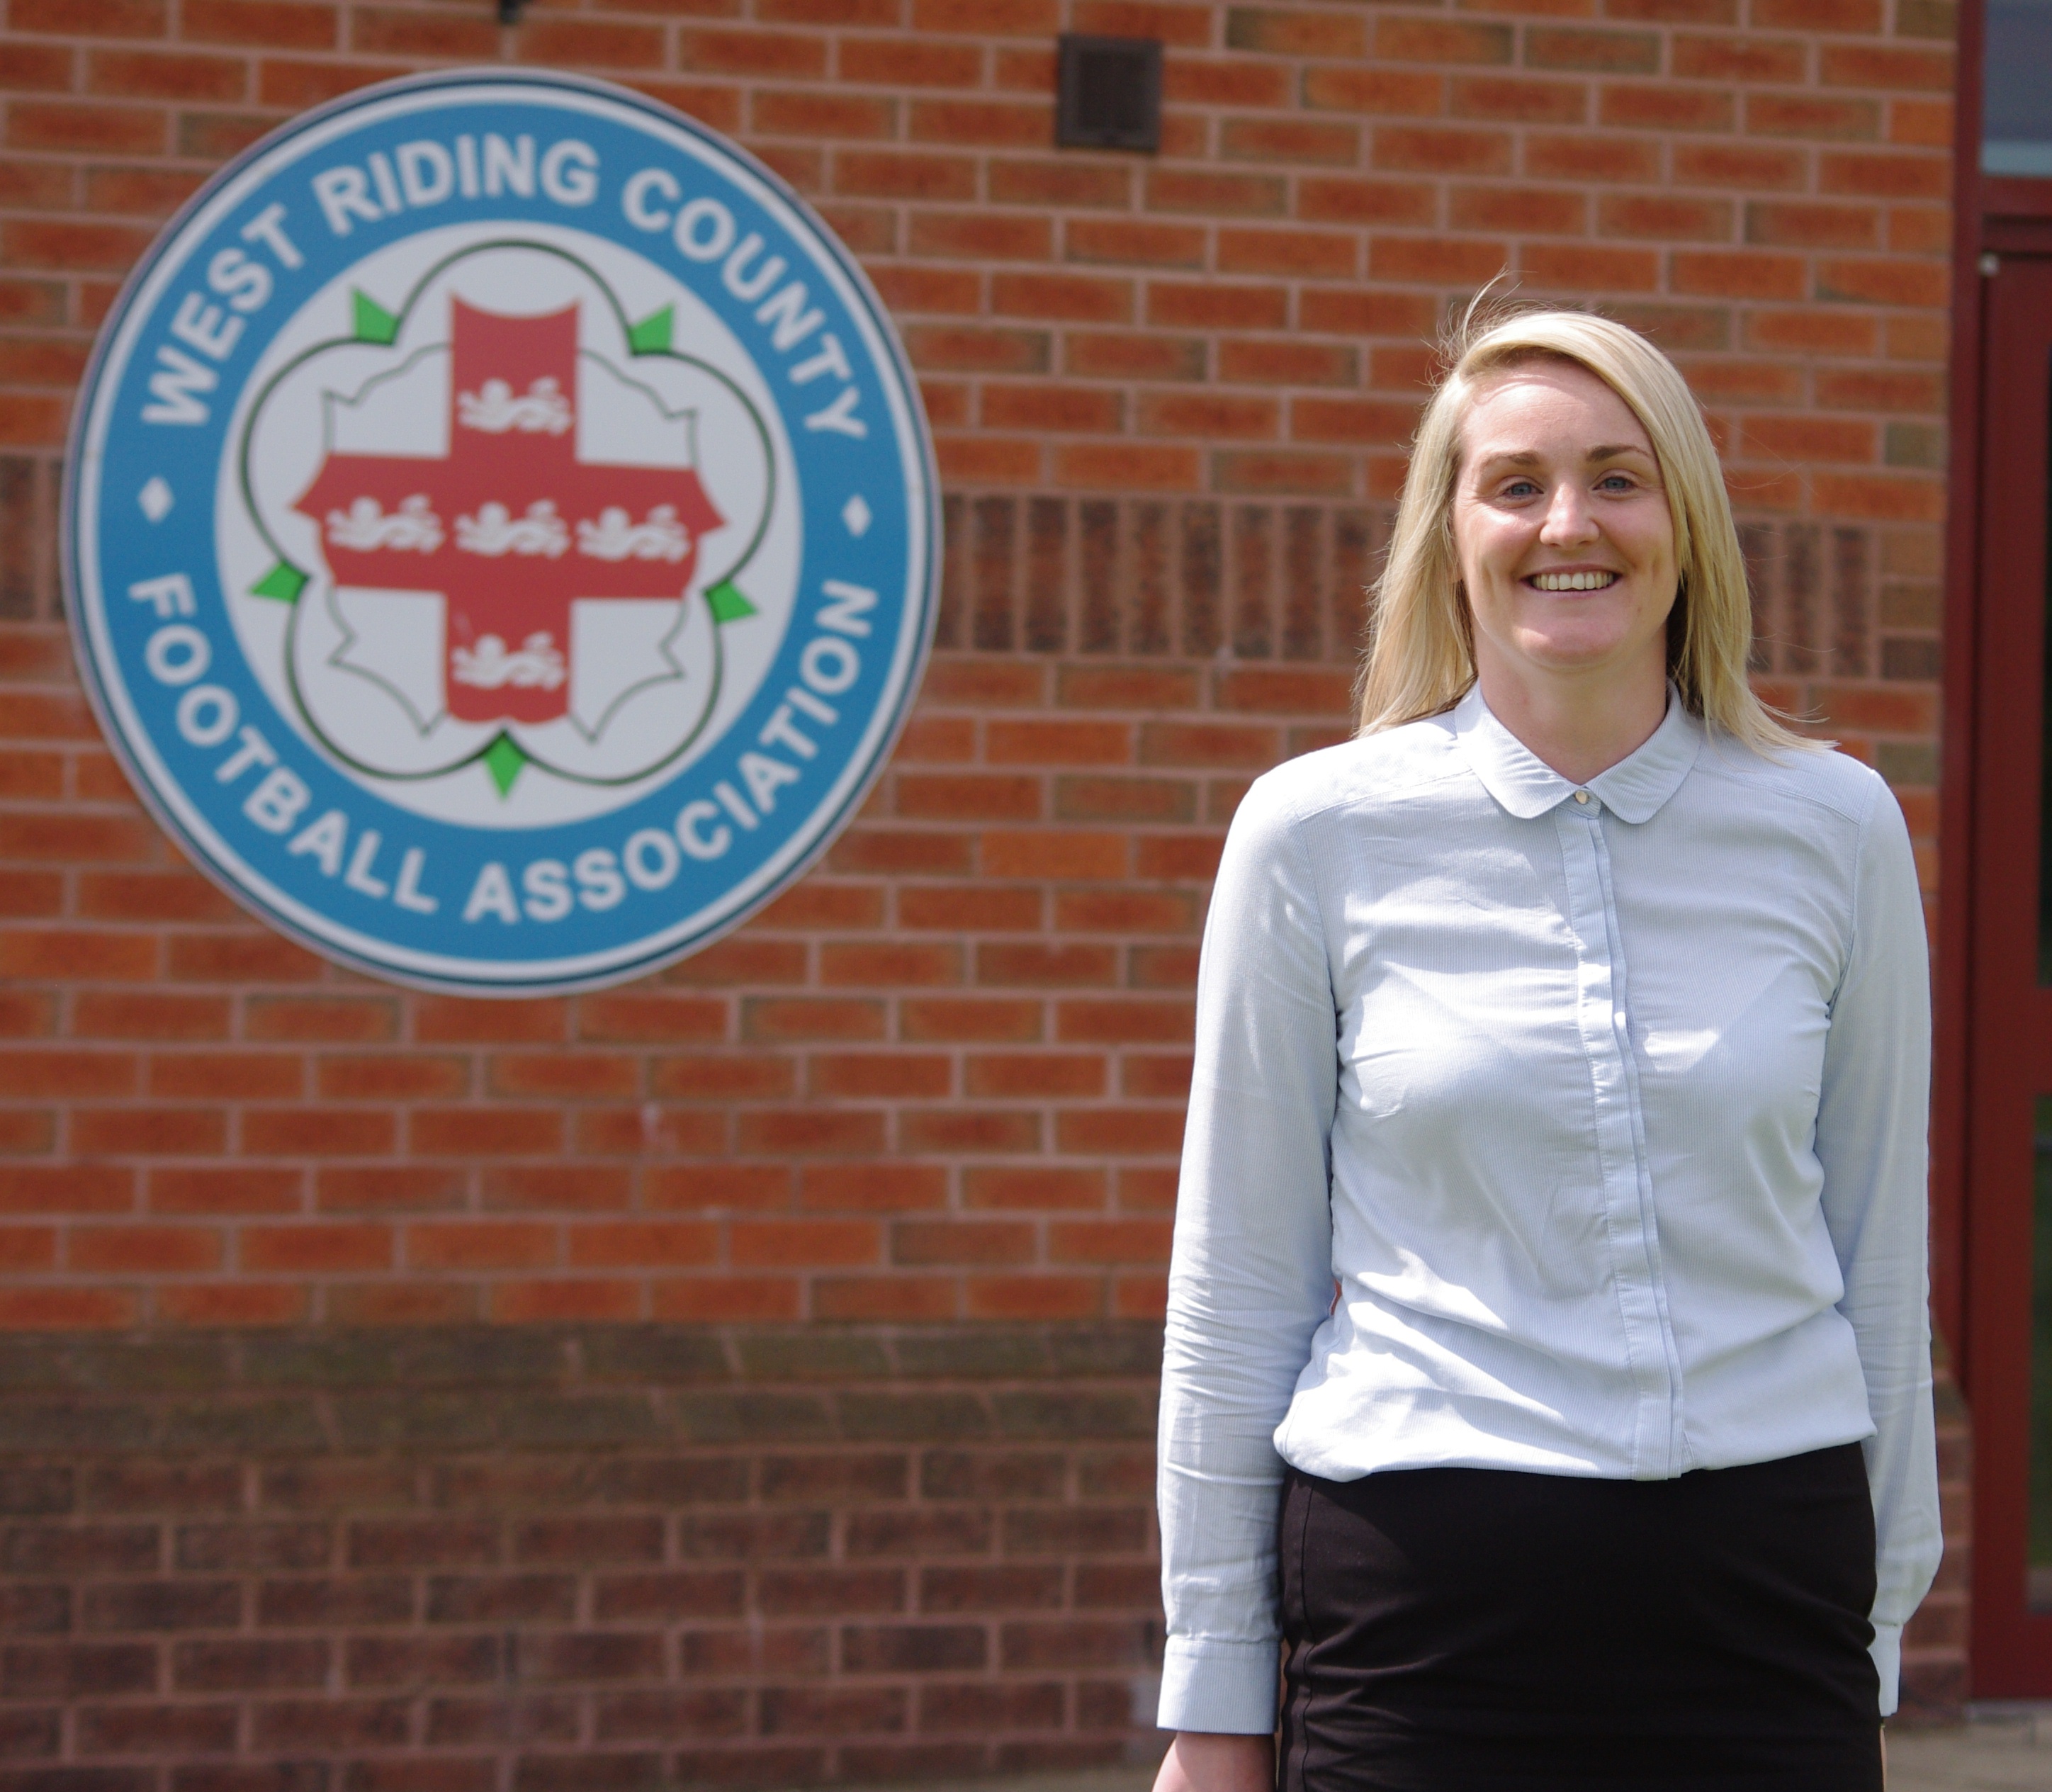 West Riding County FA chief executive Hannah Simpson was appointed to the role in January 2012